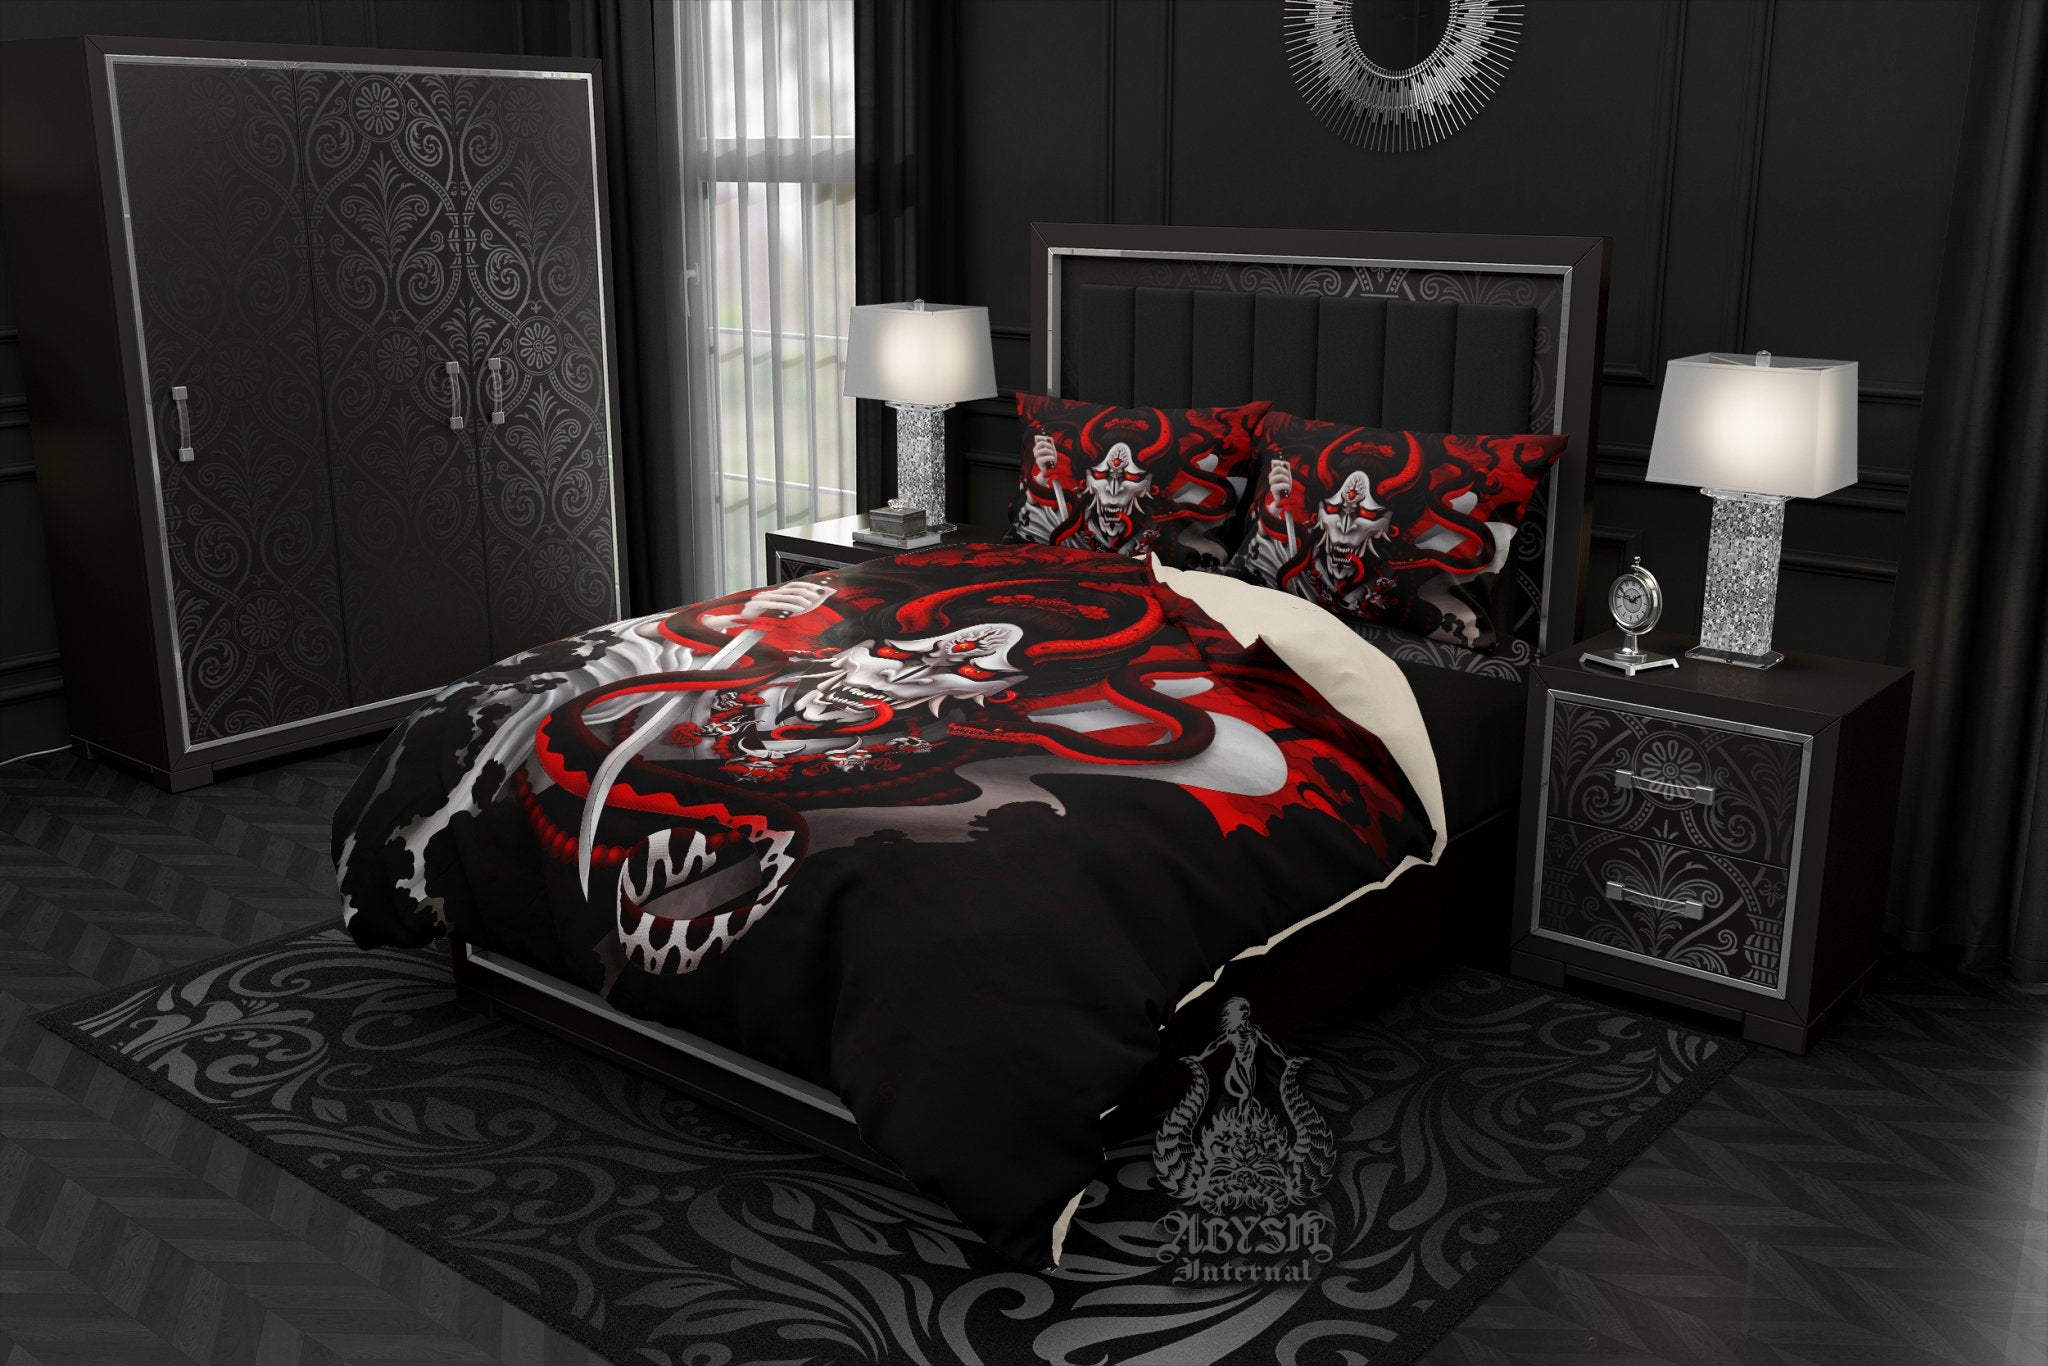 Bloody White Goth Hannya Bedding Set, Comforter or Duvet, Japanese Demon Bed Cover, Anime Youkai Bedroom Decor, King, Queen & Twin Size - Red Snake - Abysm Internal